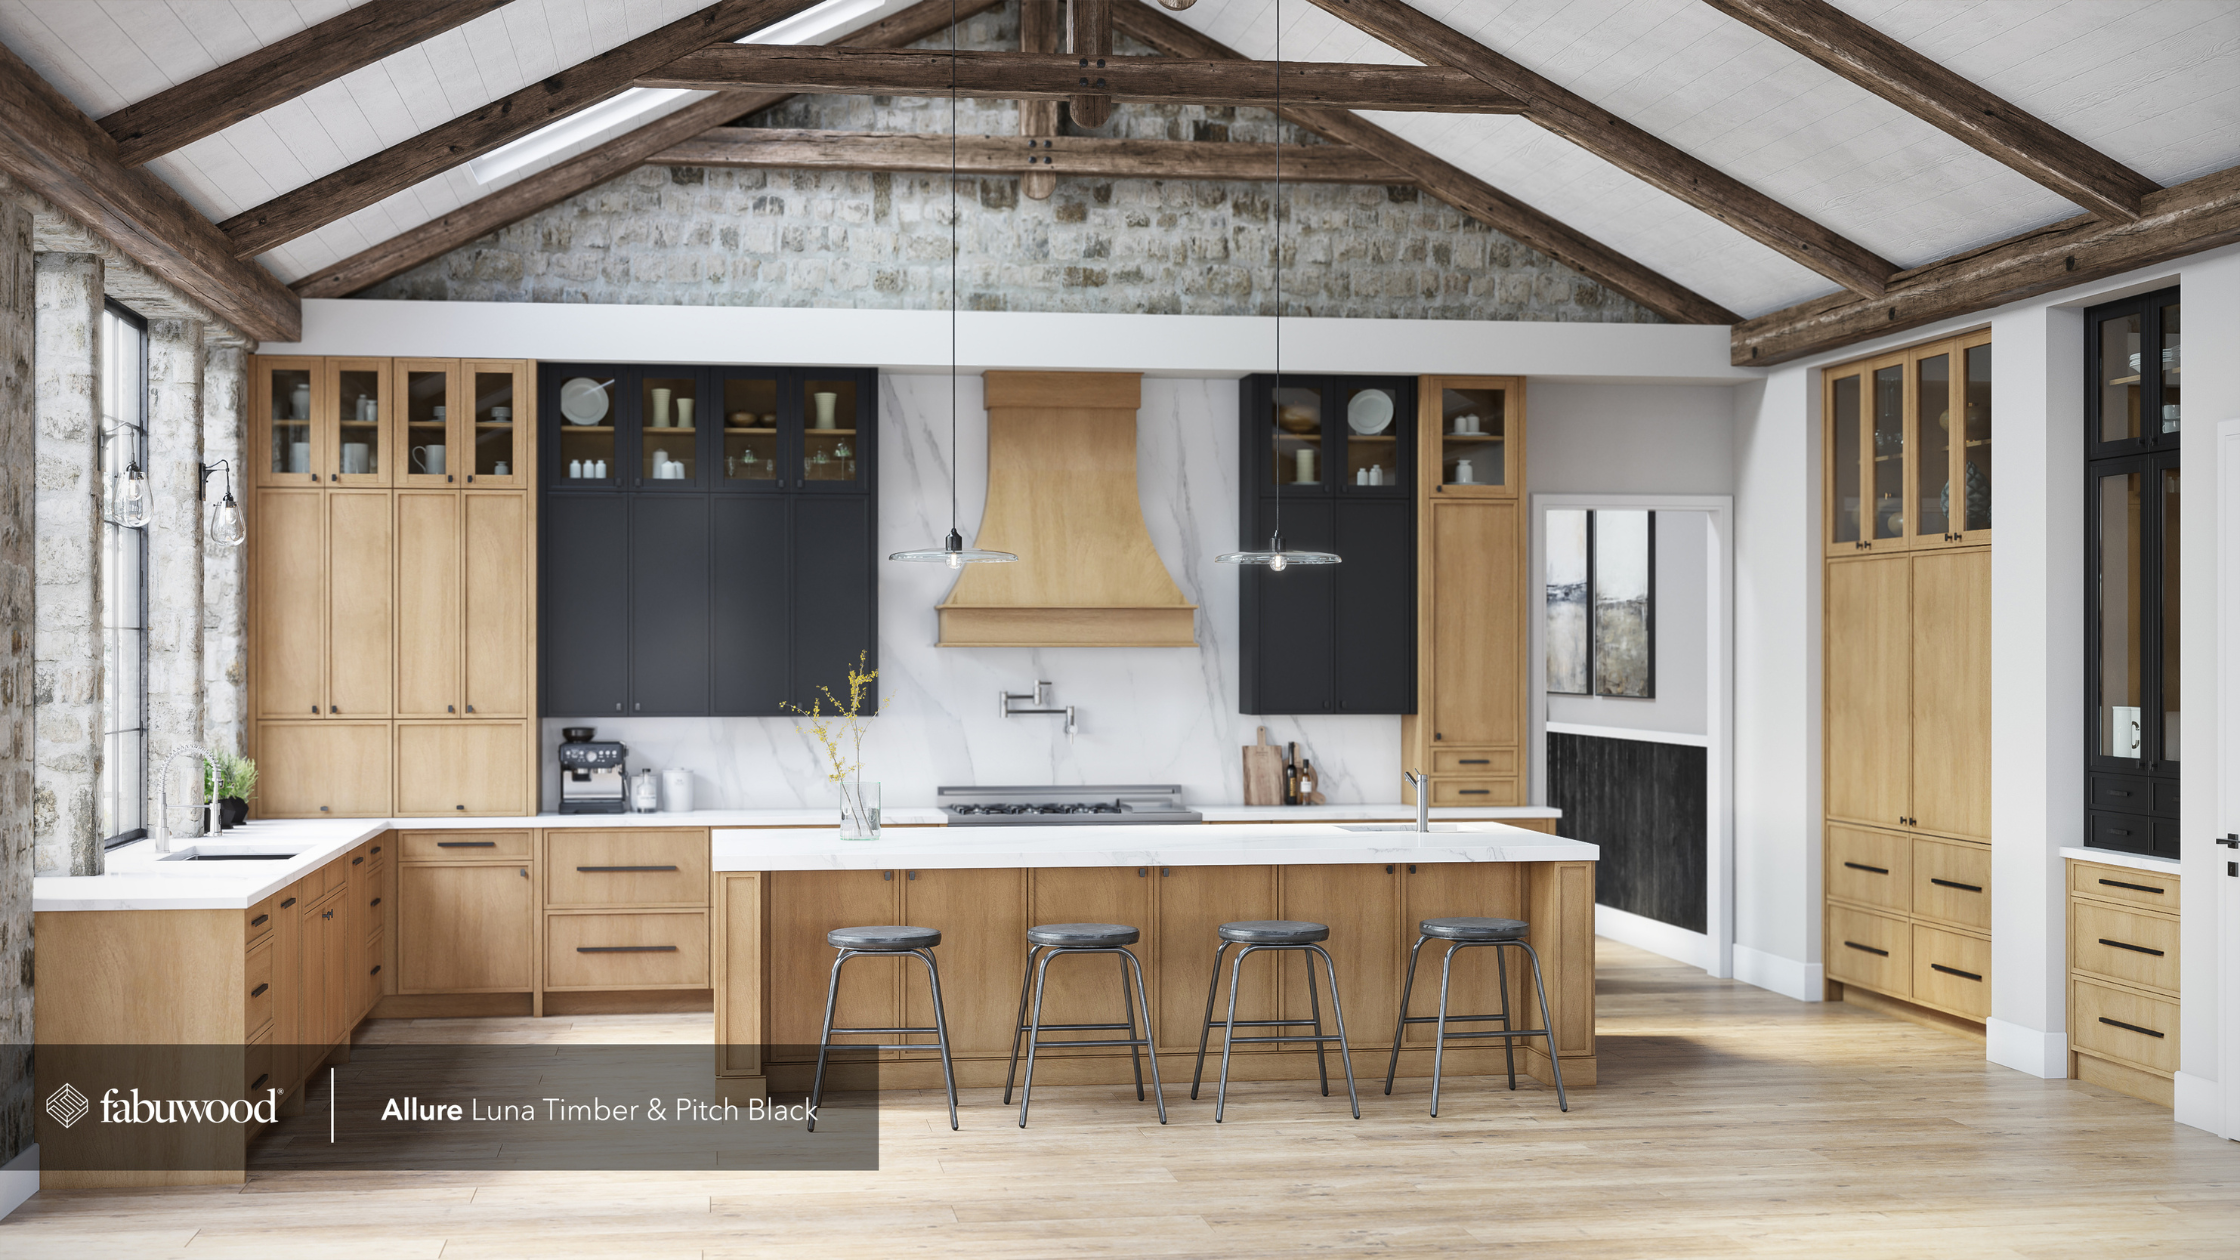 Fabuwood Allure Luna Timber with Pitch Black Kitchen with exposed beams